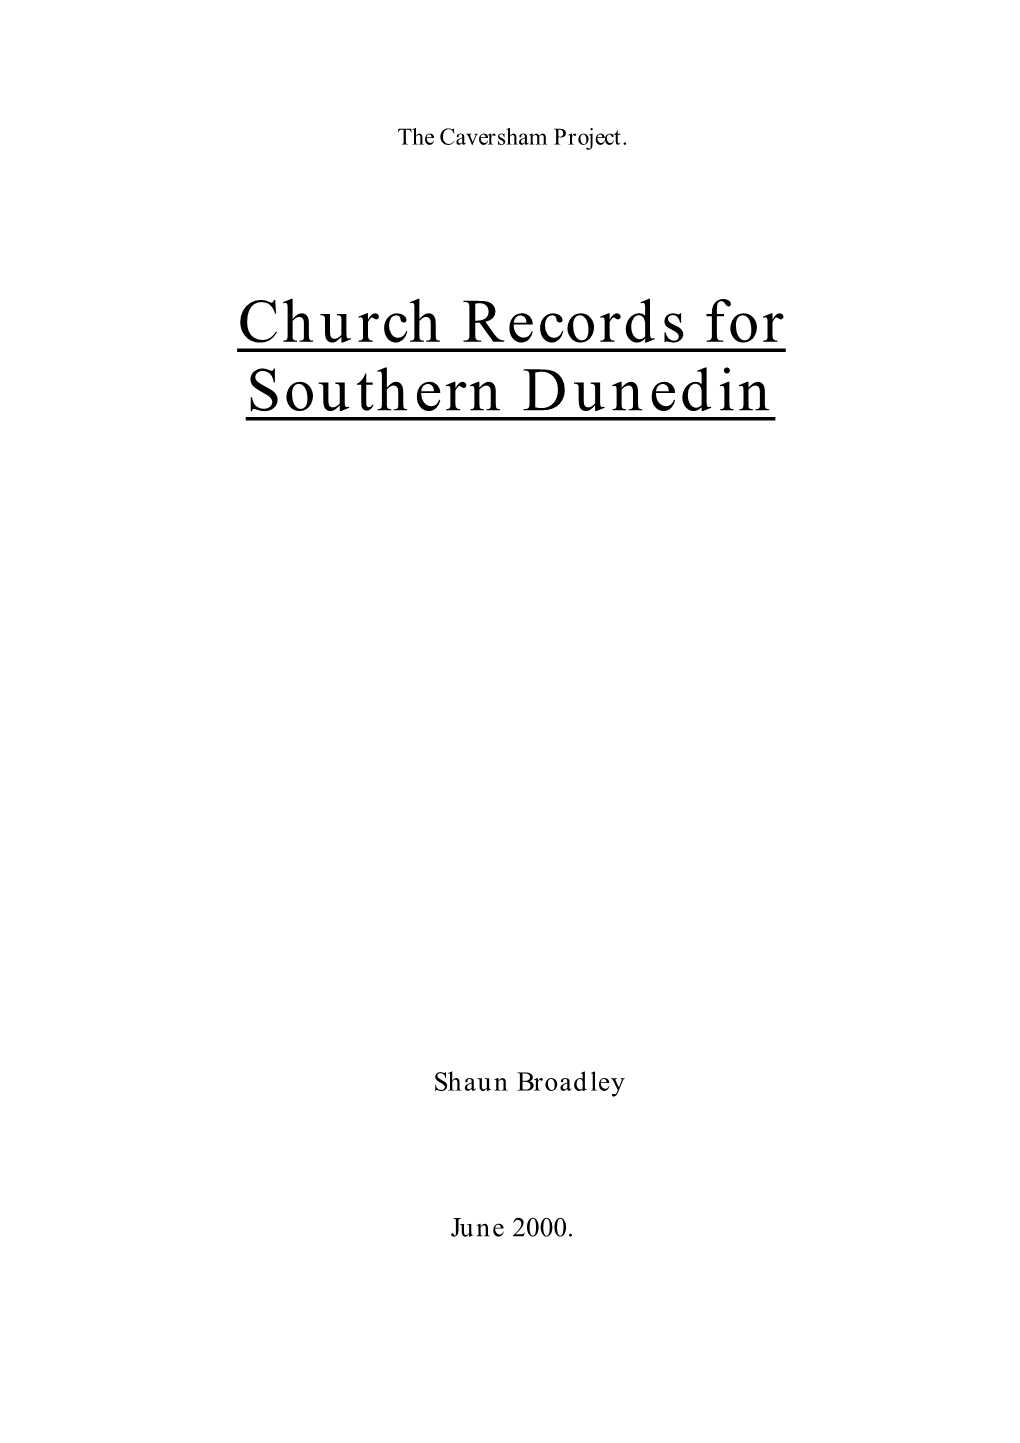 Church Records for Southern Dunedin